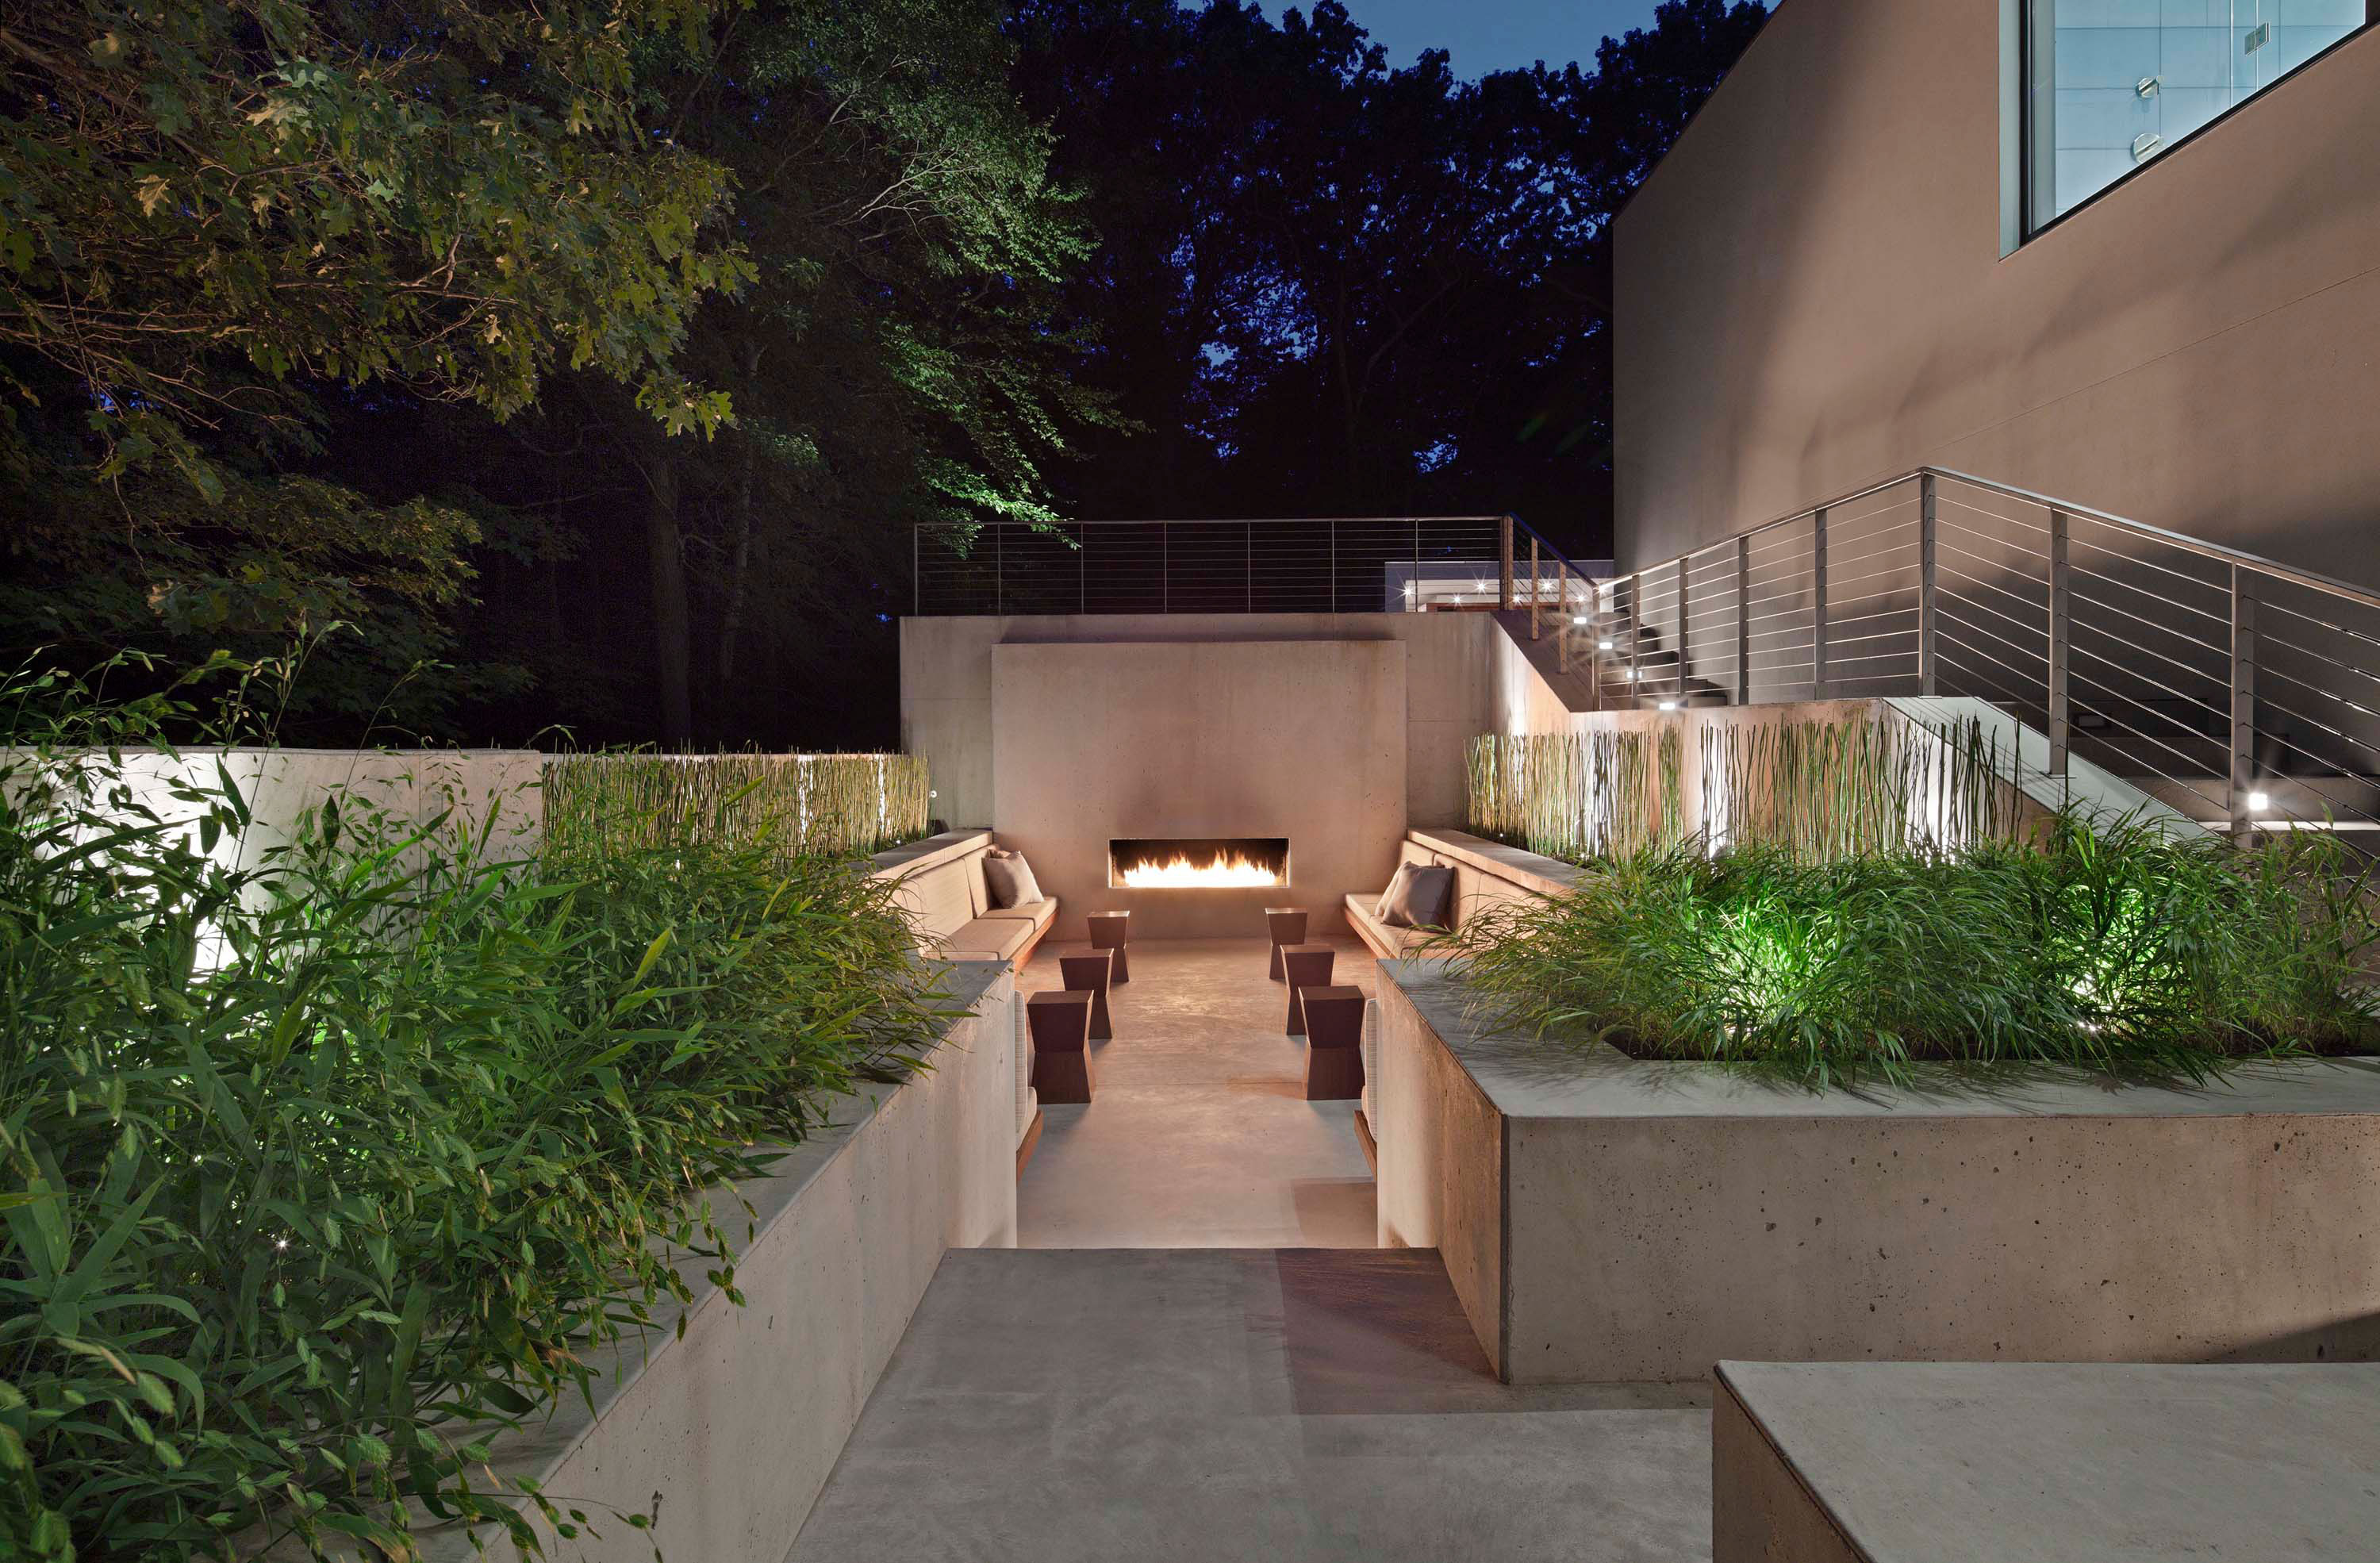 Exterior photo of the New Canaan Residence by Specht Novak Architects. Shot by Elizabeth Felicella featuring a fireplace and lower level lounge area embraced by the trees and surrounding greenery.